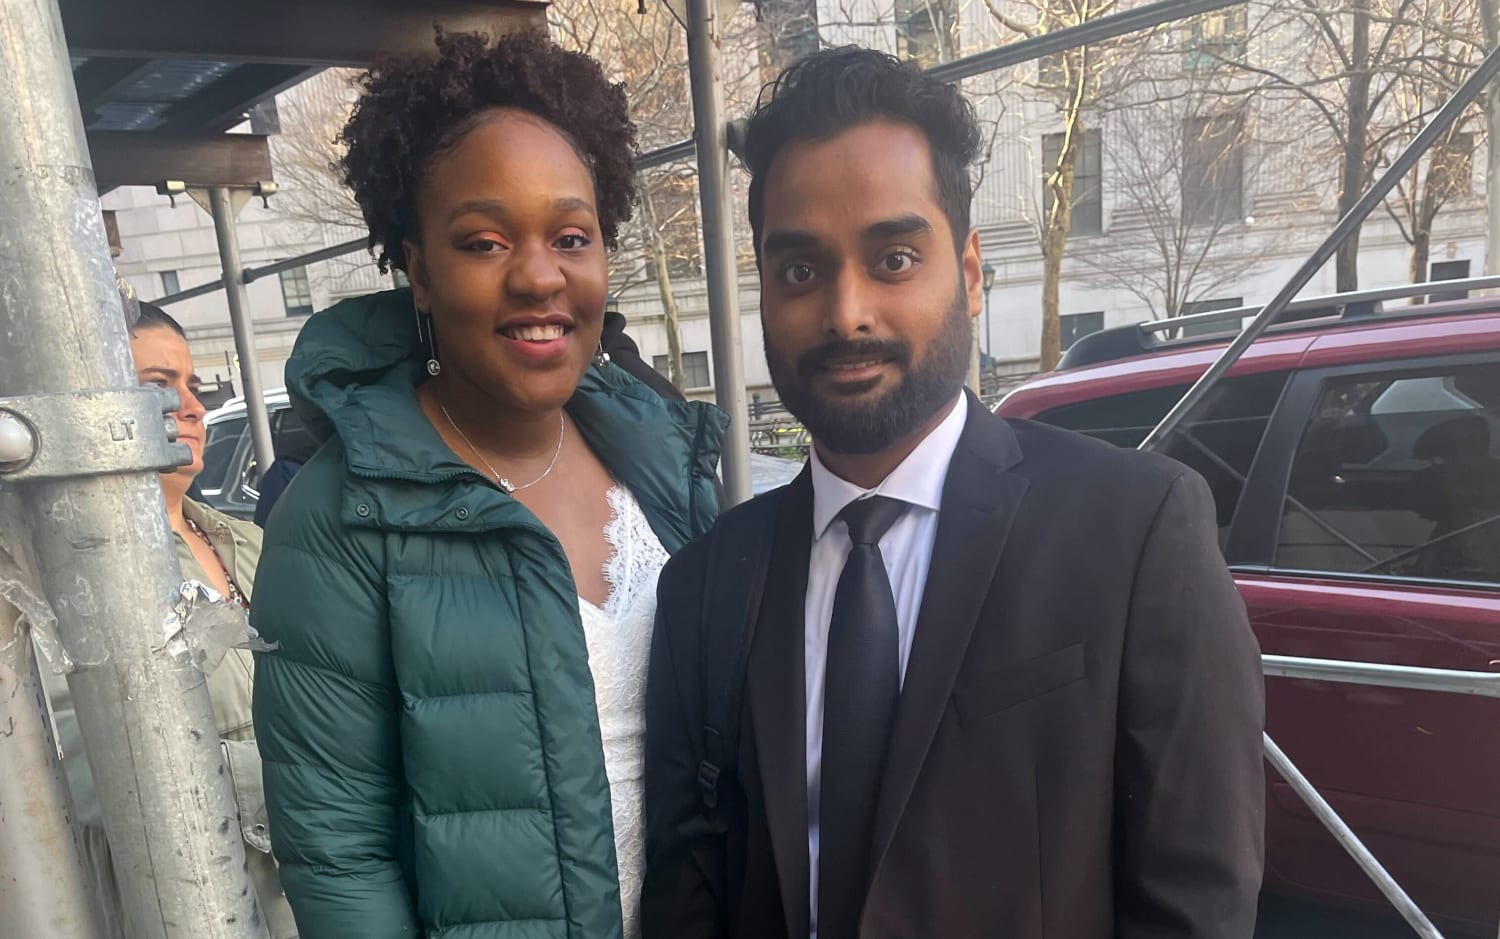 Couples wed at Manhattan courthouse ahead of Trump arraignment hearing